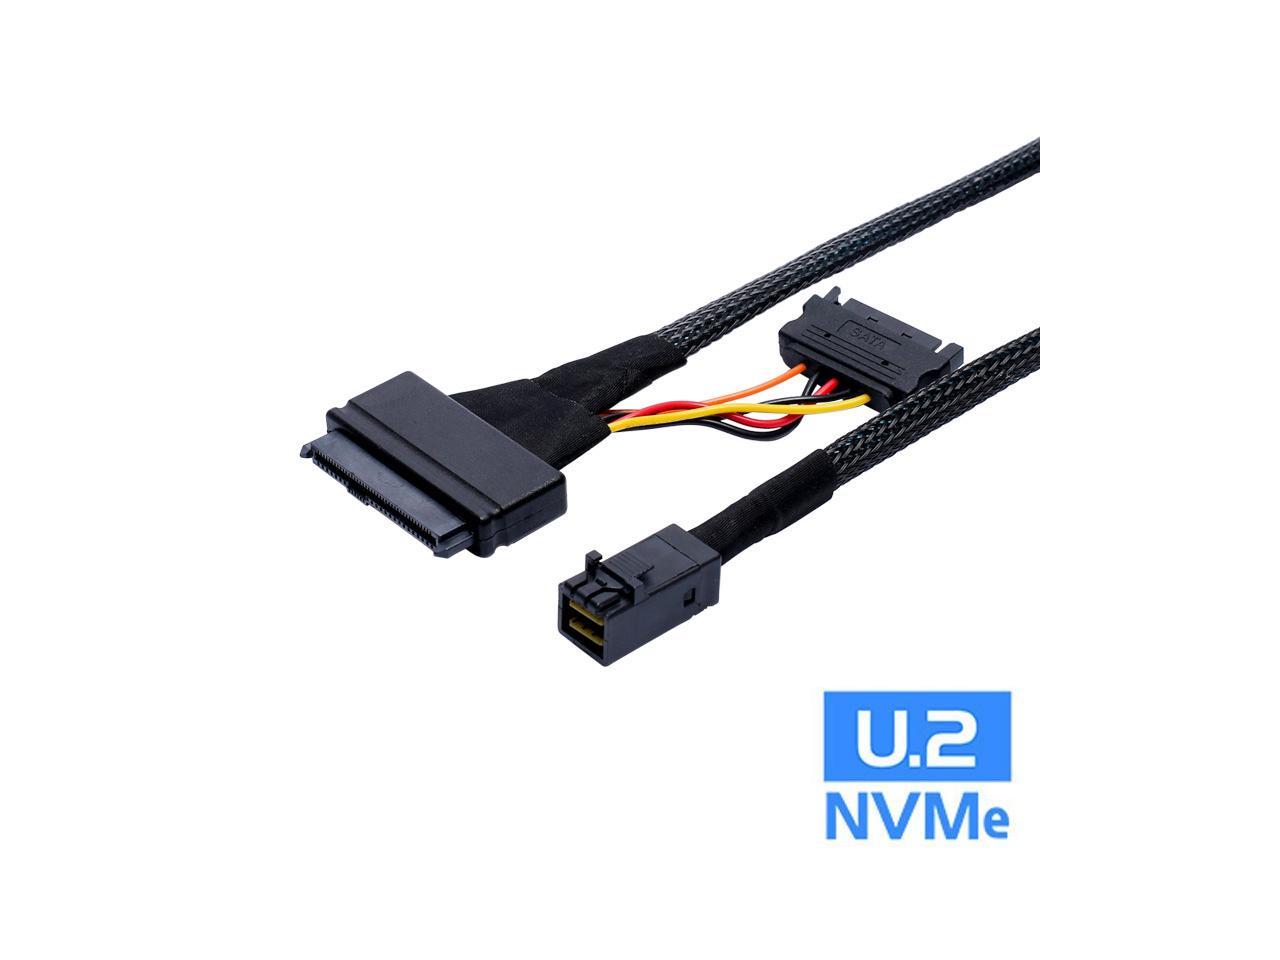 1.5FT/50CM SFF-8643 to SFF-8639 Cable CableCreation 12GB/s Mini SAS HD Cable Internal Mini SAS SFF 8643 to U.2 SFF-8639 Cable with 15 Pin Female SATA Connector 